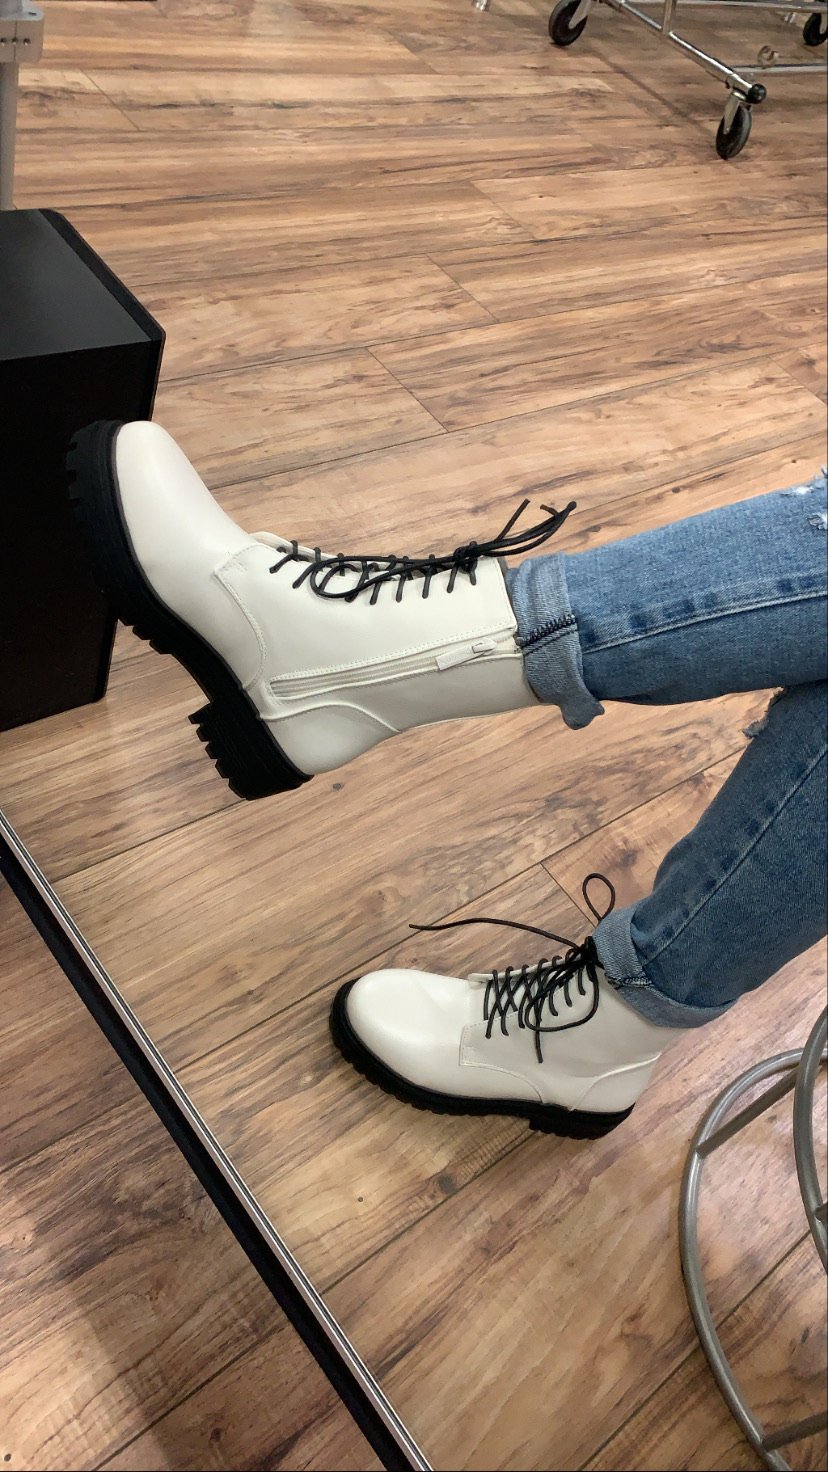 Andy boots “ white